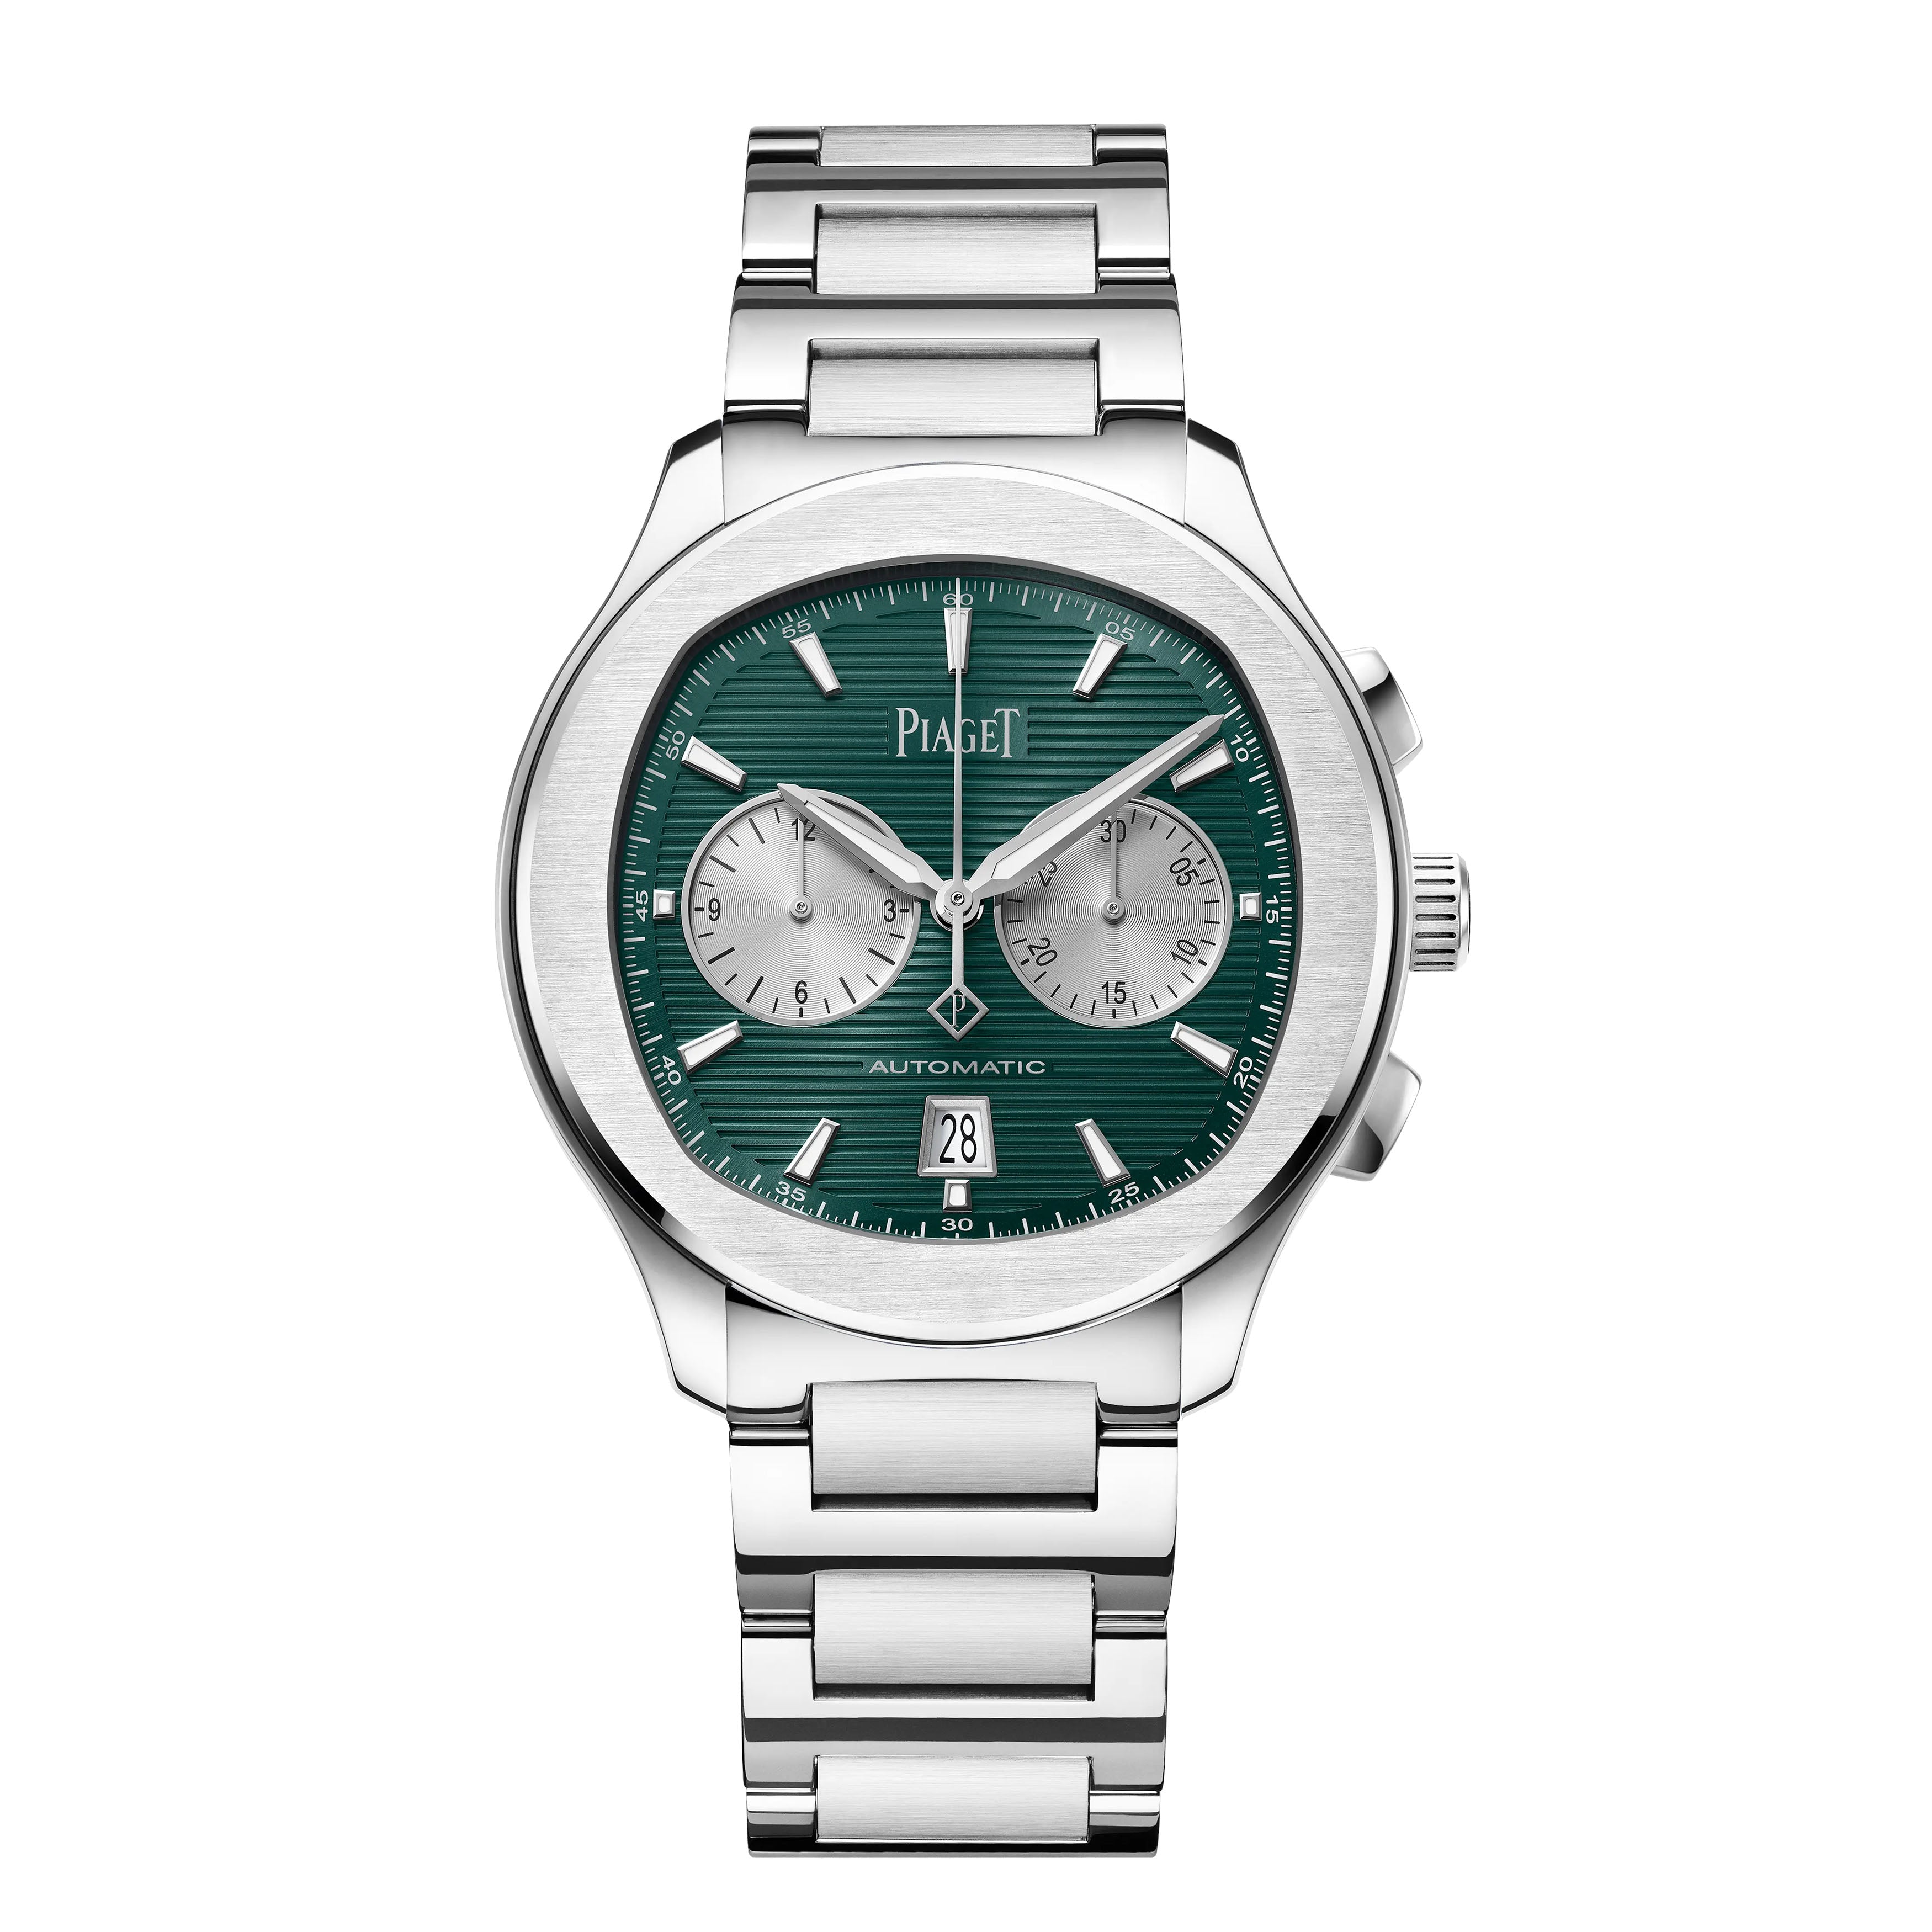 Piaget Polo Chronograph Watch, 42mm Green Dial, G0A49024